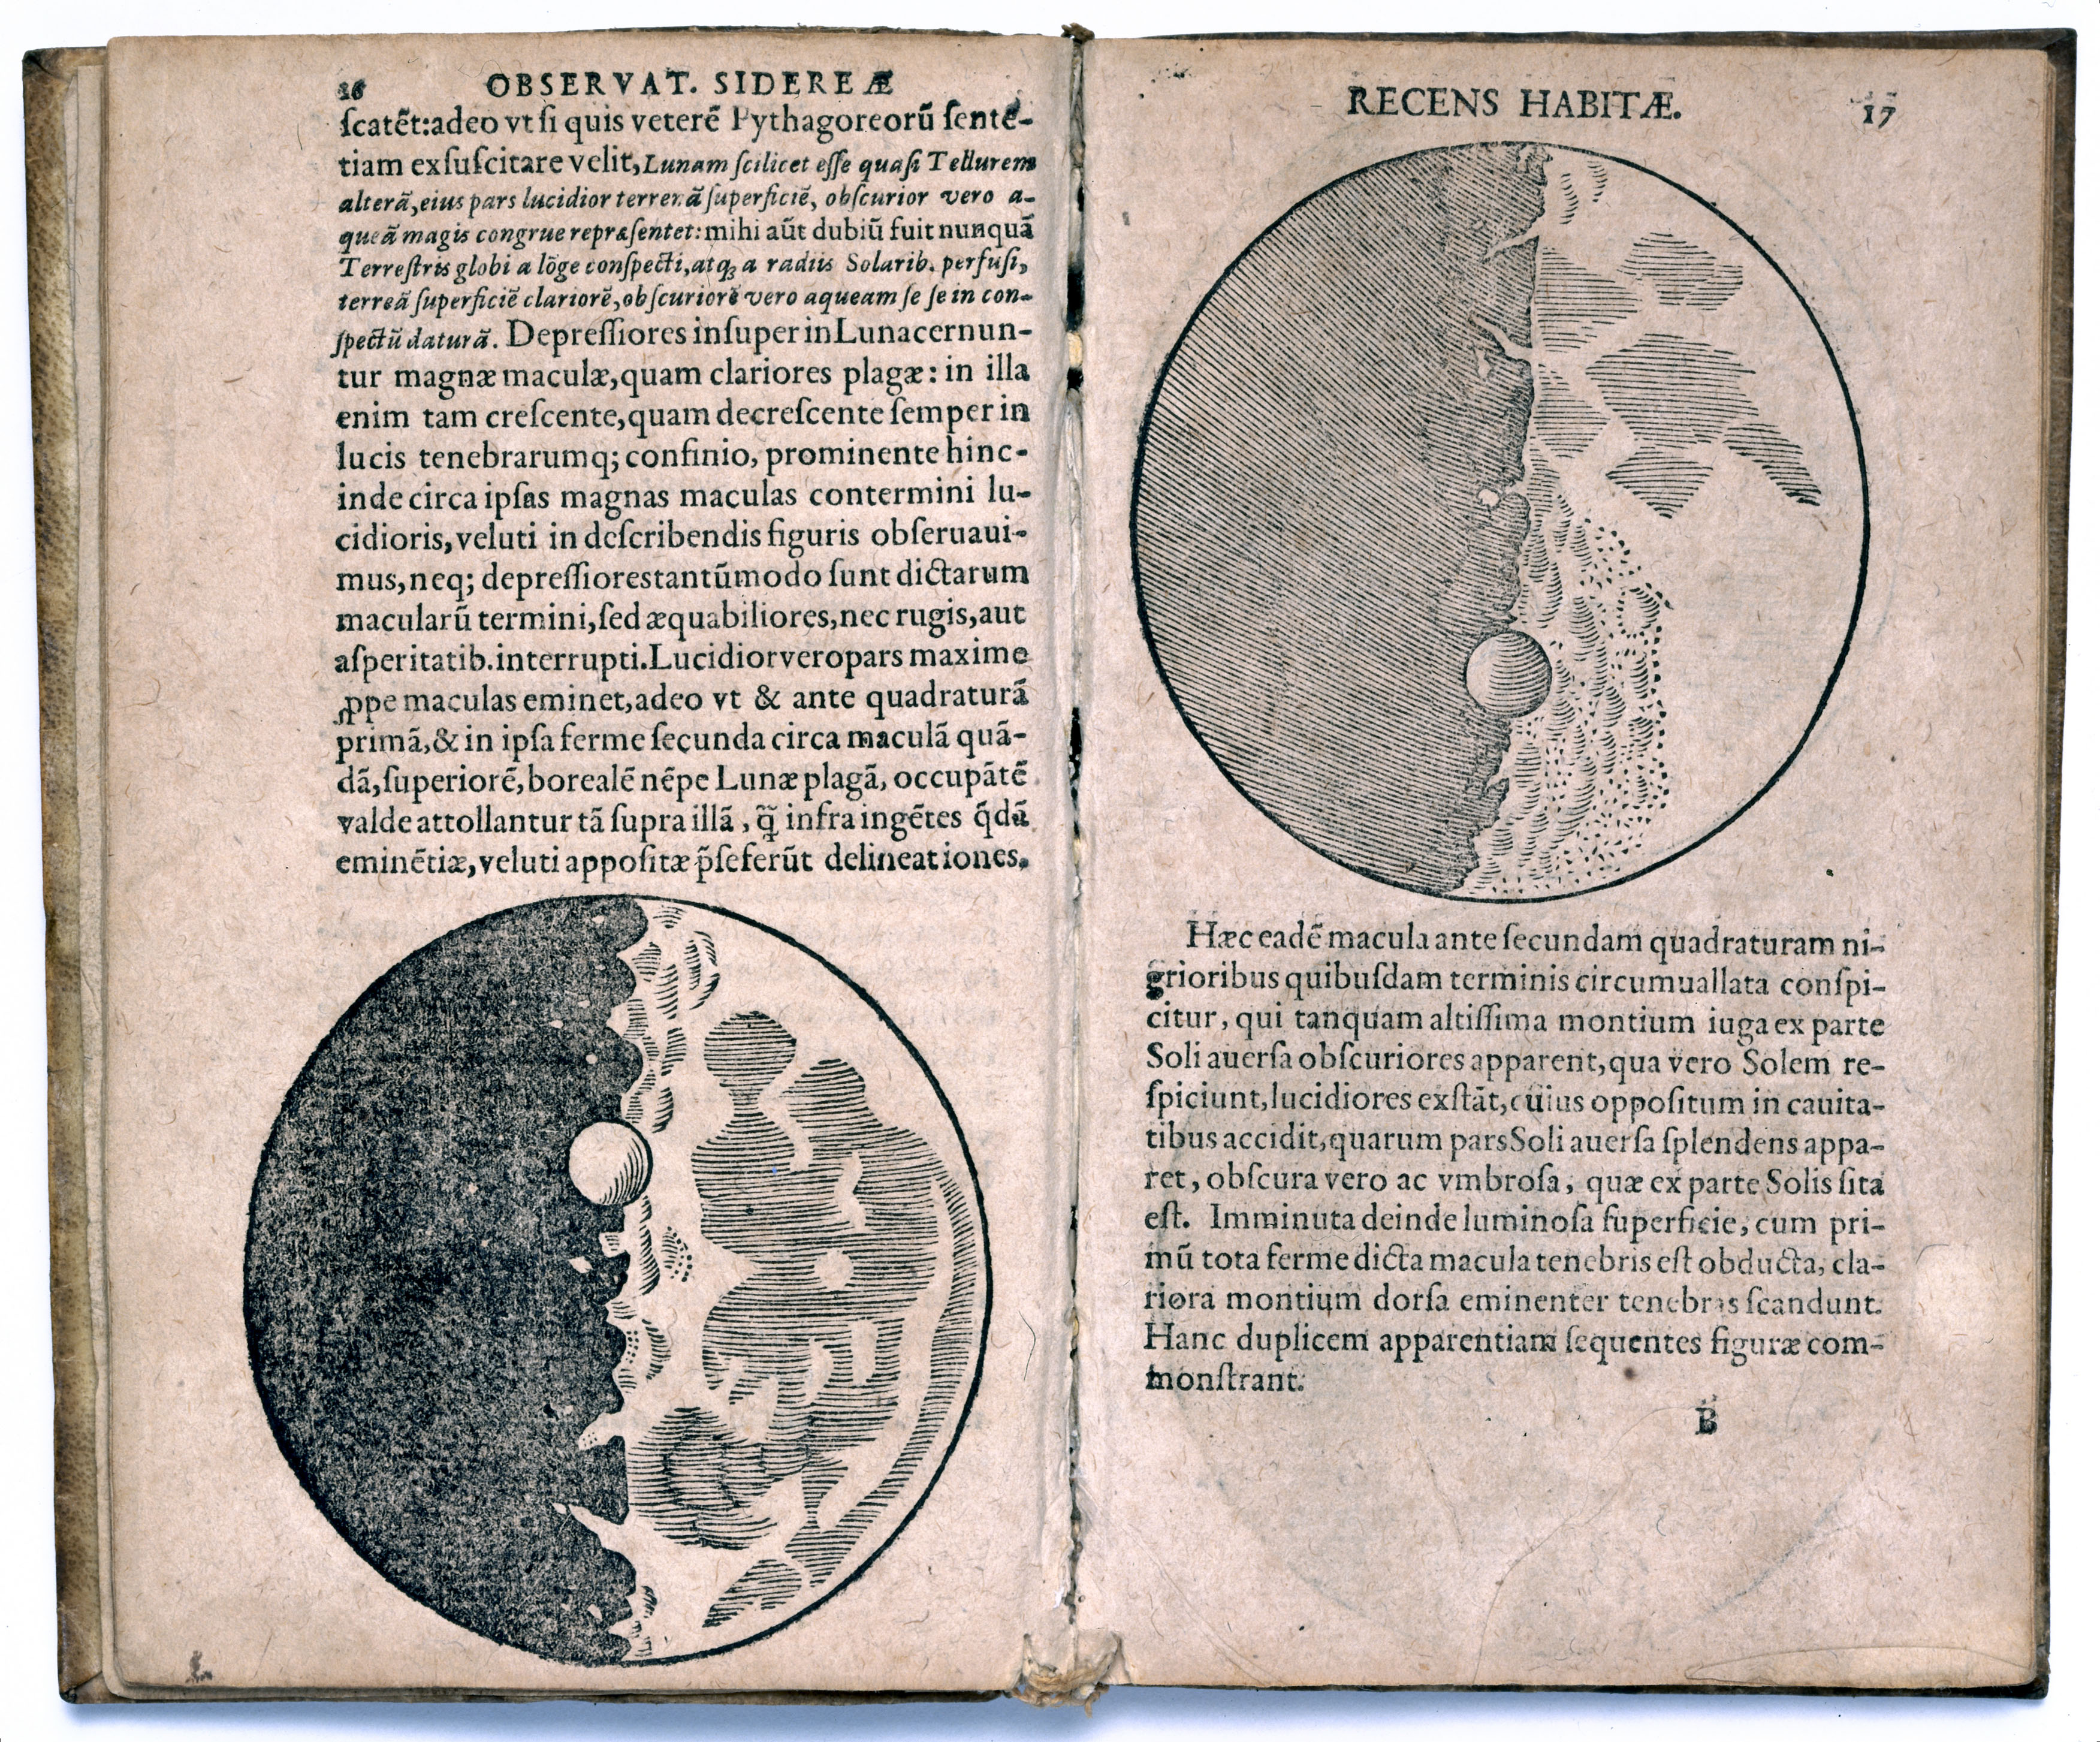 Pages from 'Sidereus, nuncius magna' (known as 'The Starry Messenger', Venice, 1610) by Galileo Galilei (1564-1642), a book of astronomical theory and observations. Galileo was an Italian astronomer and physicist and outstanding representative of the movement which transformed medieval natural philosophy into modern science. (Science &amp; Society Picture Library—SSPL via Getty Images)